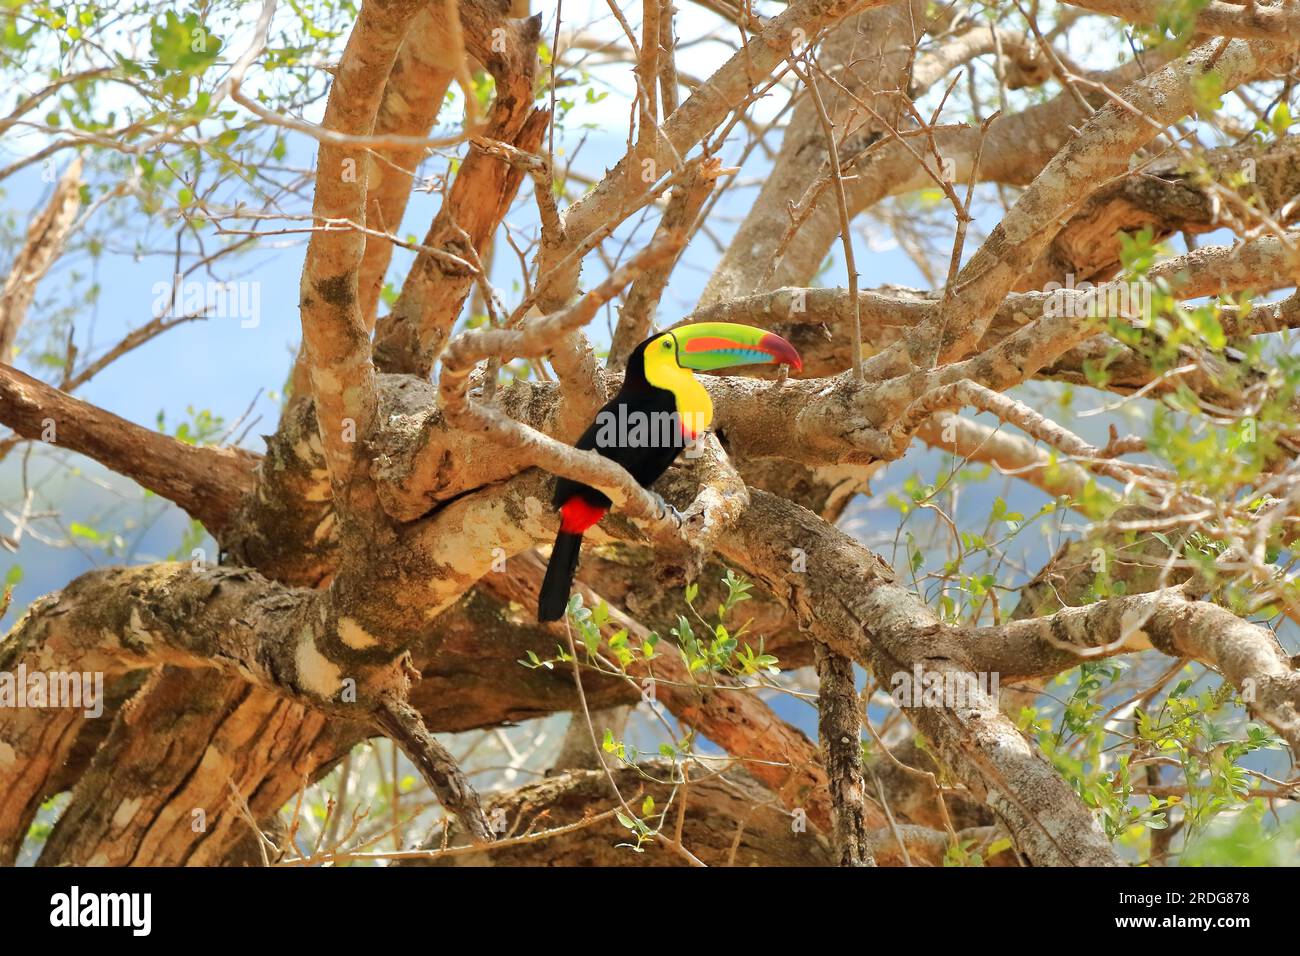 Closeup of a Keel-billed Toucan (Ramphastus sulfuratus) perched on a mossy branch, Costa Rica Stock Photo